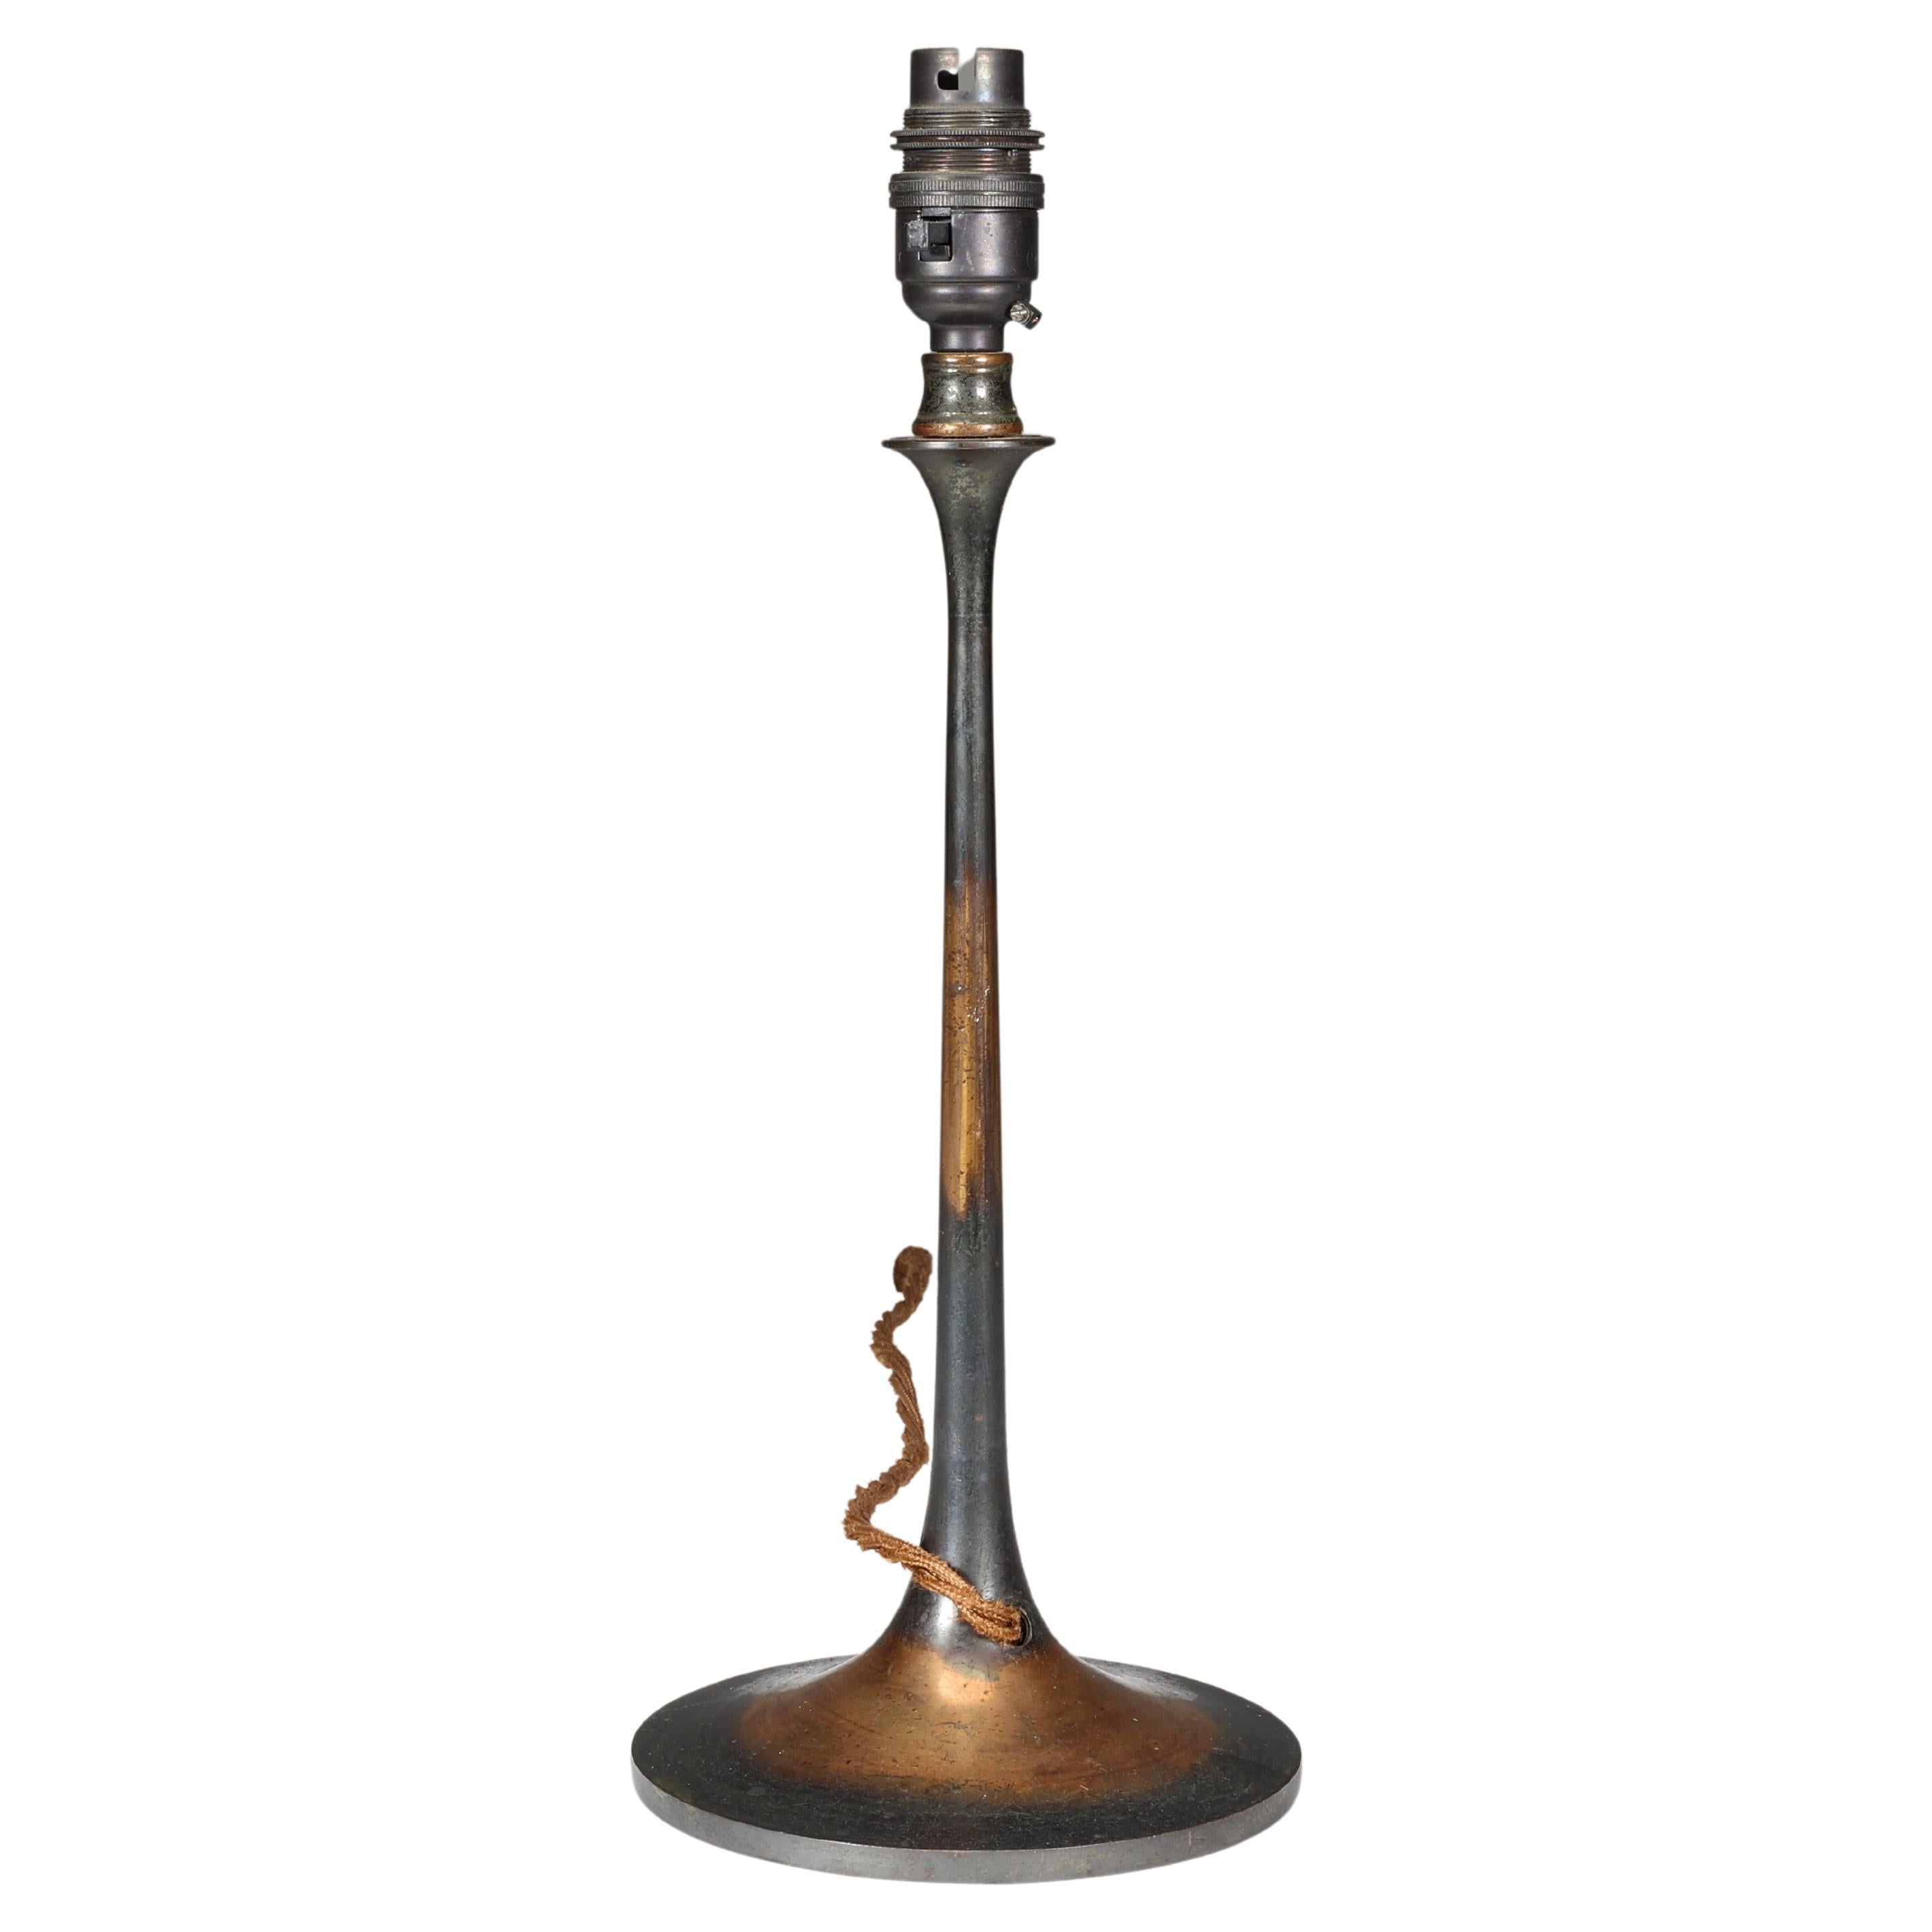 An Arts and Crafts copper table lamp professionally rewired